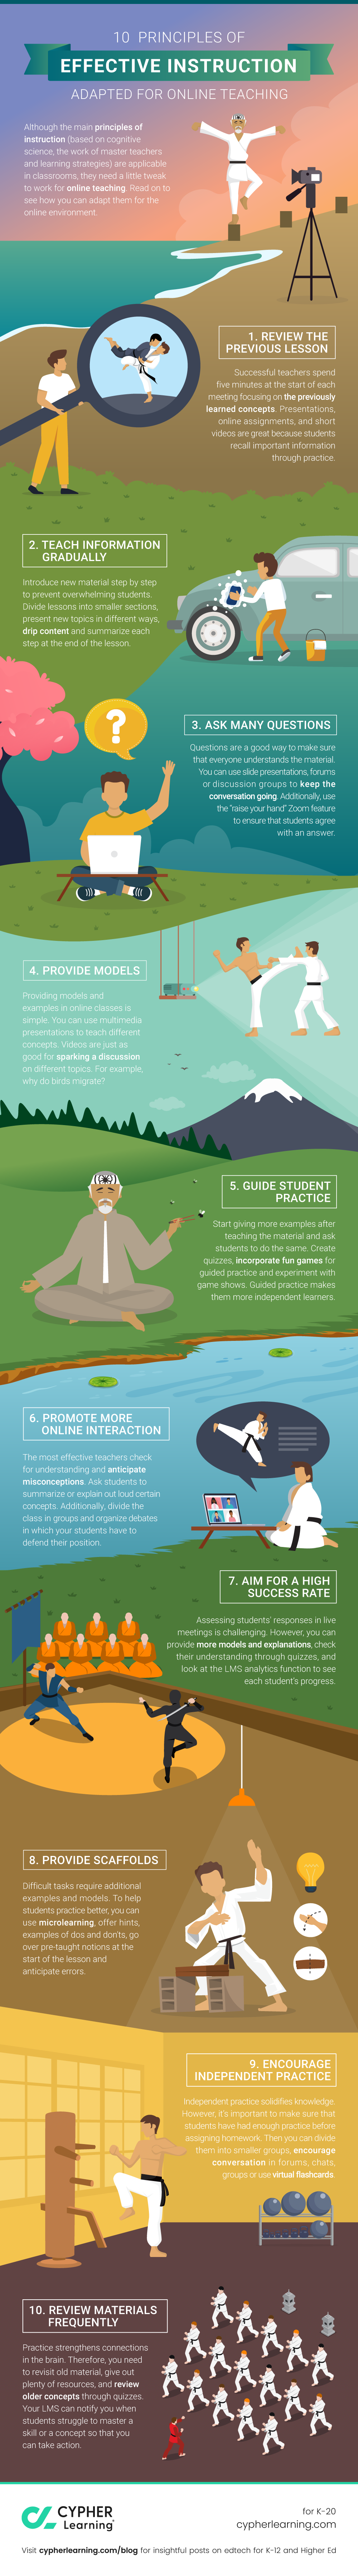 10 Principles of effective instruction adapted for online teaching